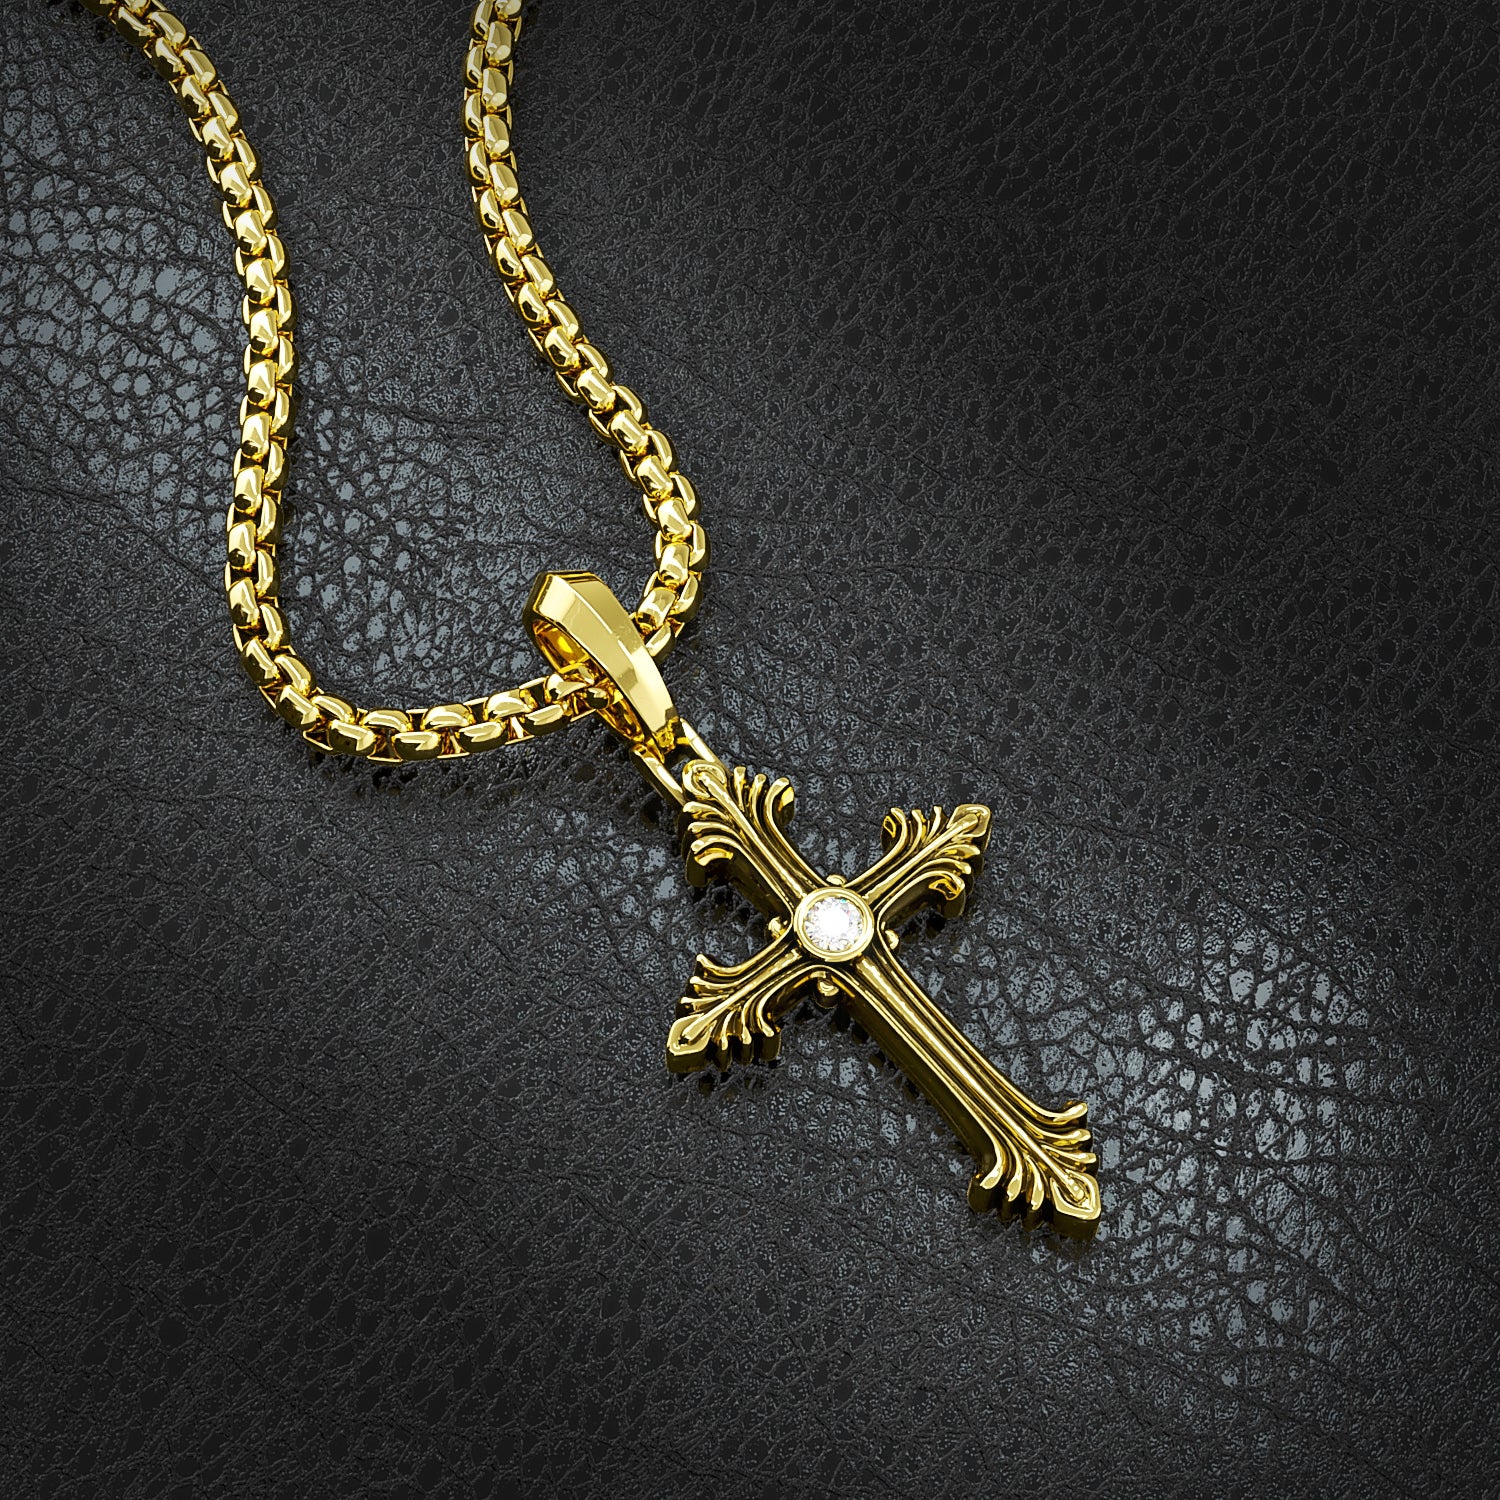 Glory Solid Gold Cross Pendant with Diamonds by Proclamation Jewelry Small